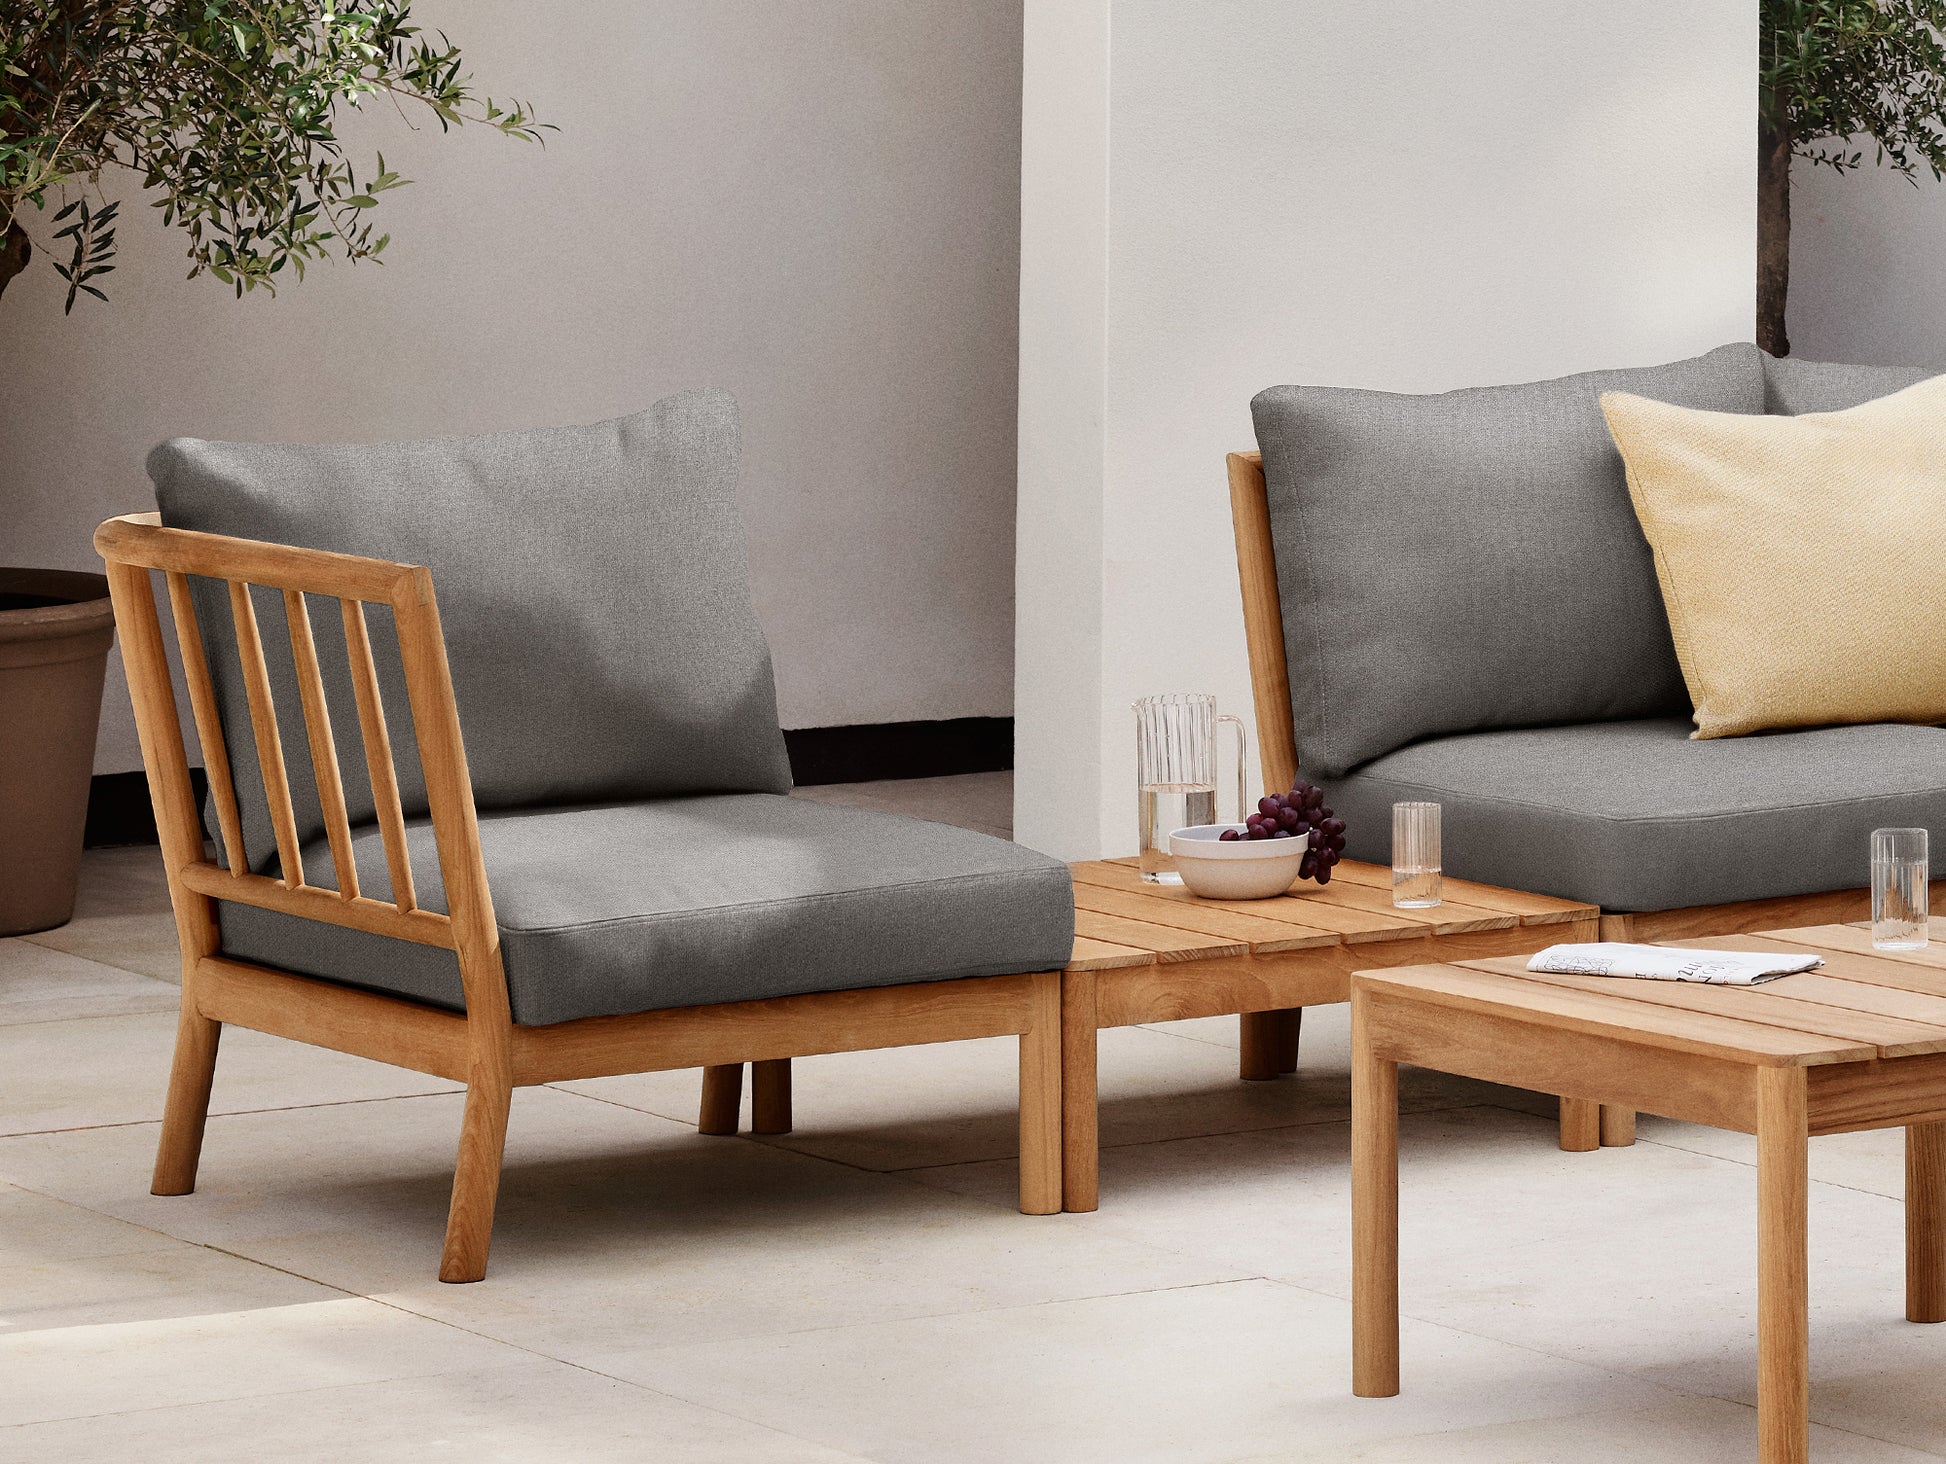 Tradition Outdoor Modular Sofa by Fritz Hansen - From Left: End Module, Lounge Table, Spacer Module 